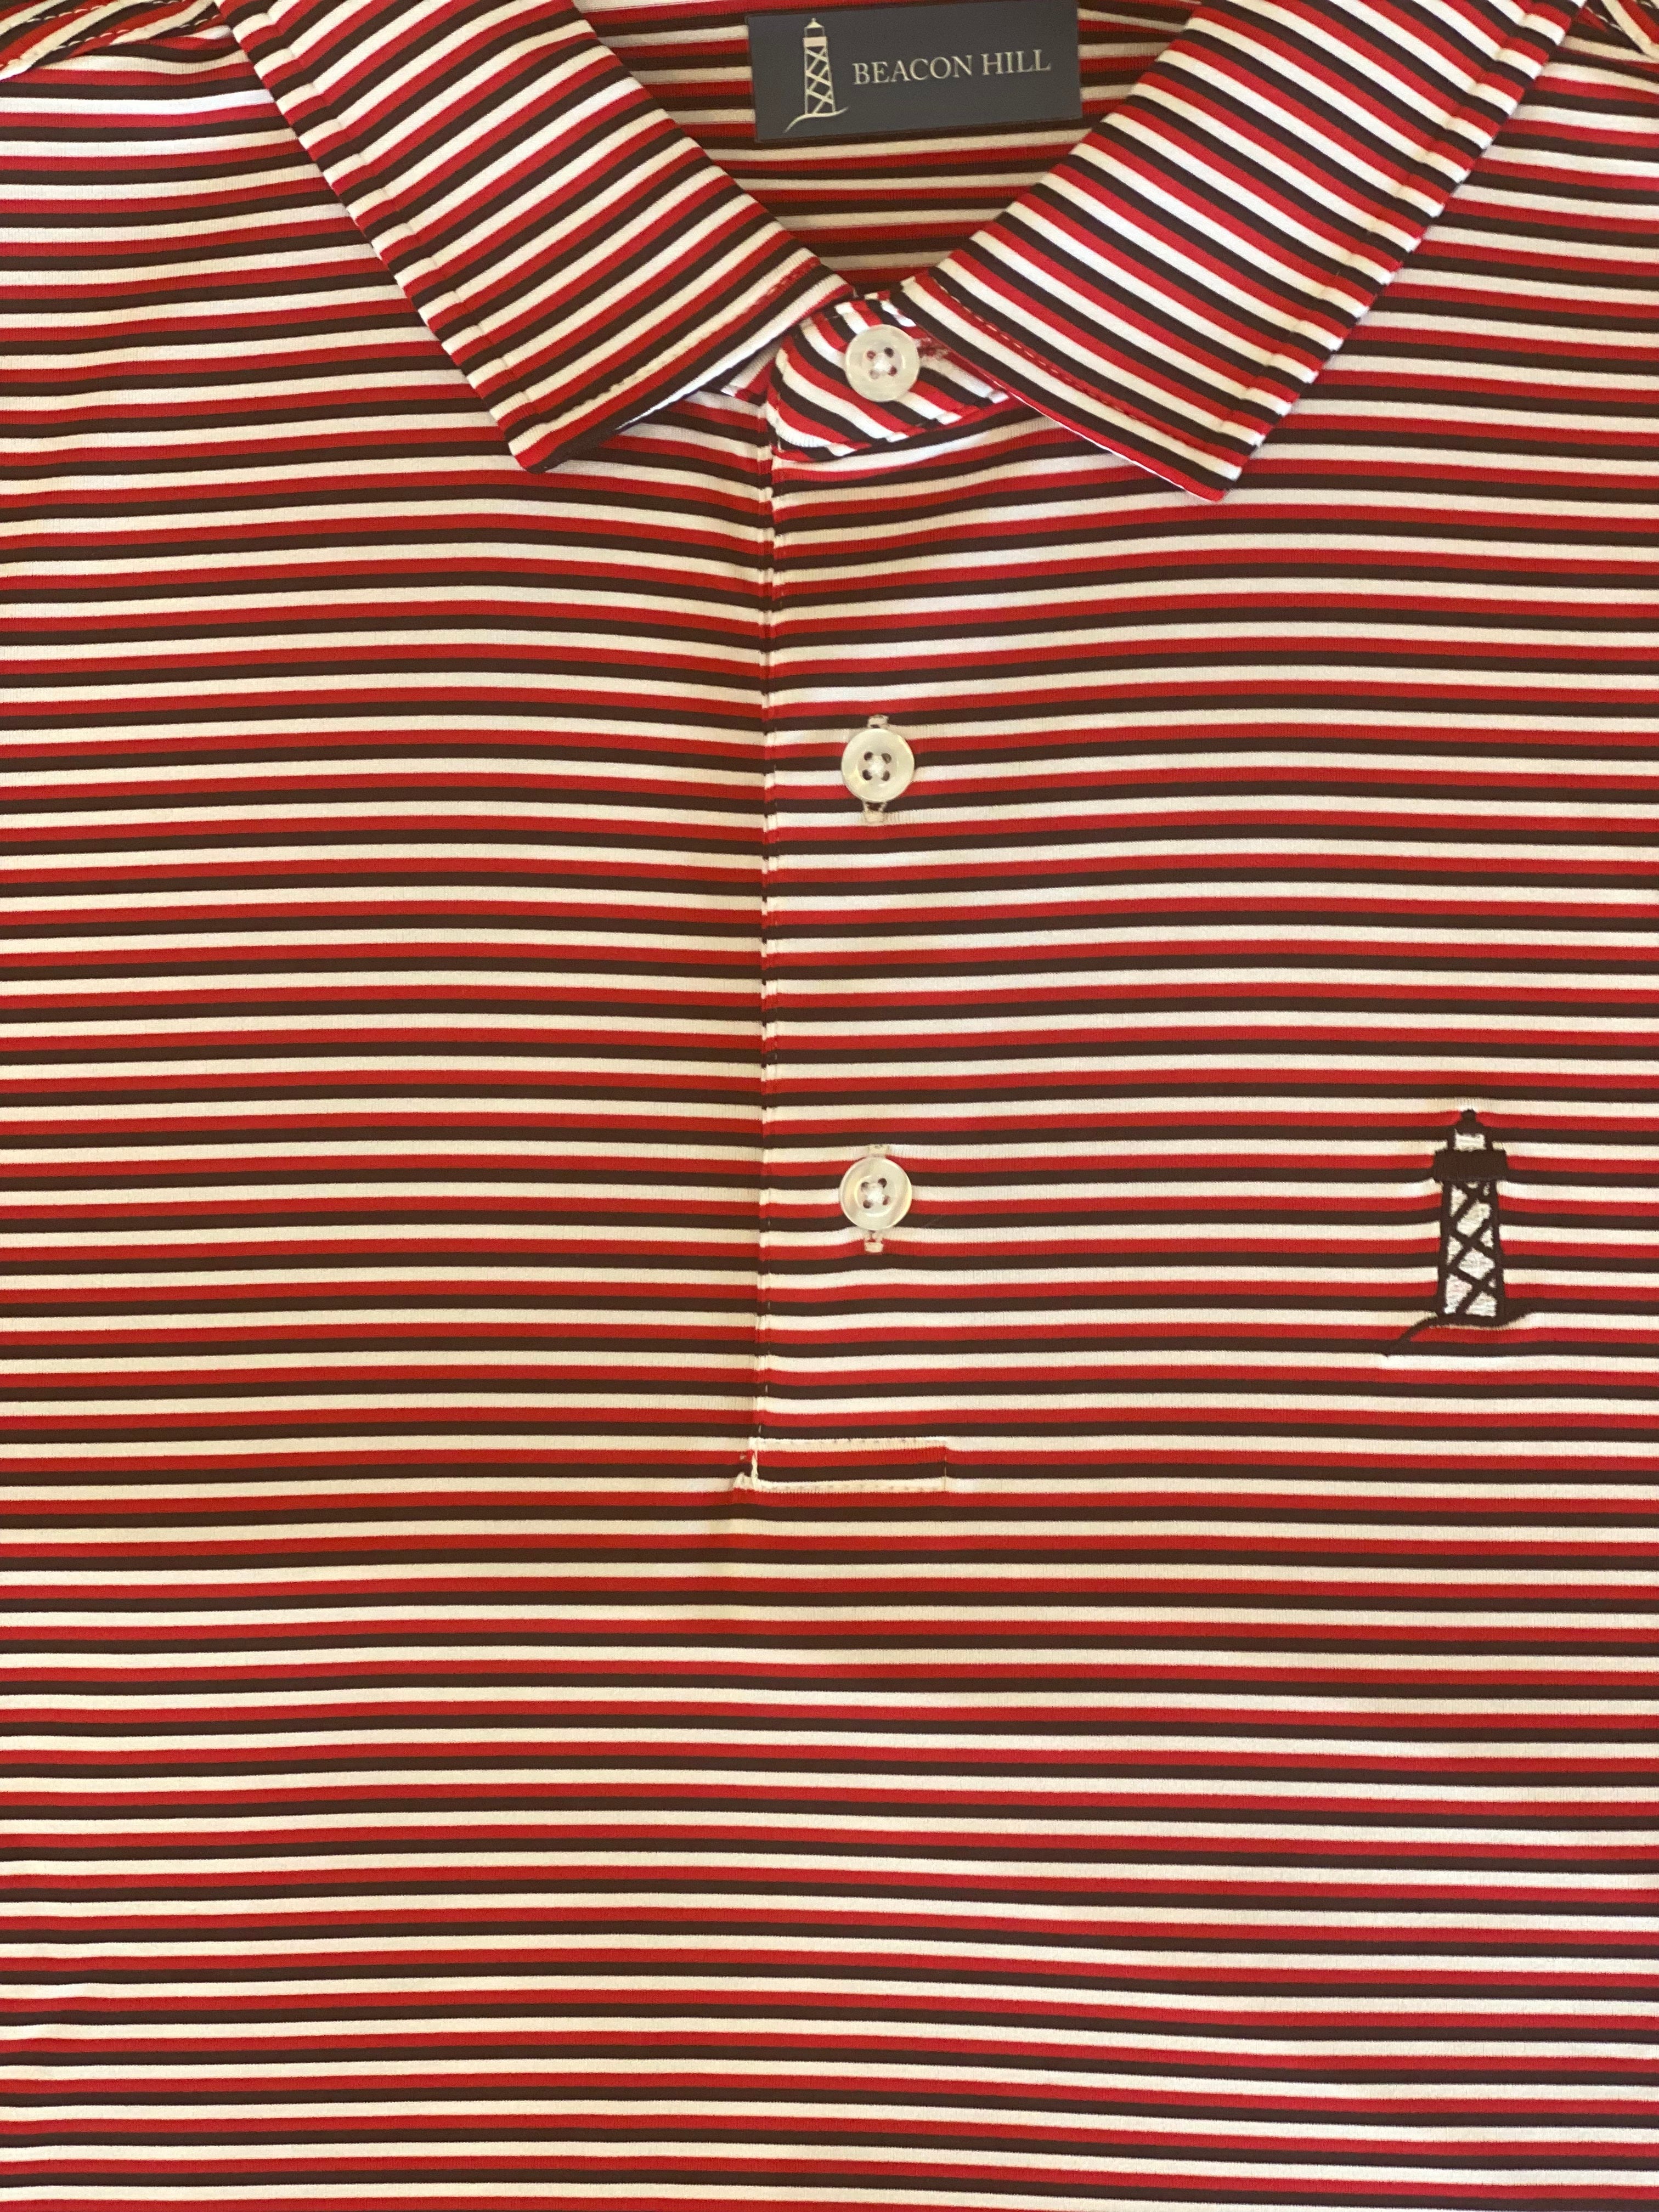 Beacon Hill Red/Black/White Striped Short Sleeve Polo